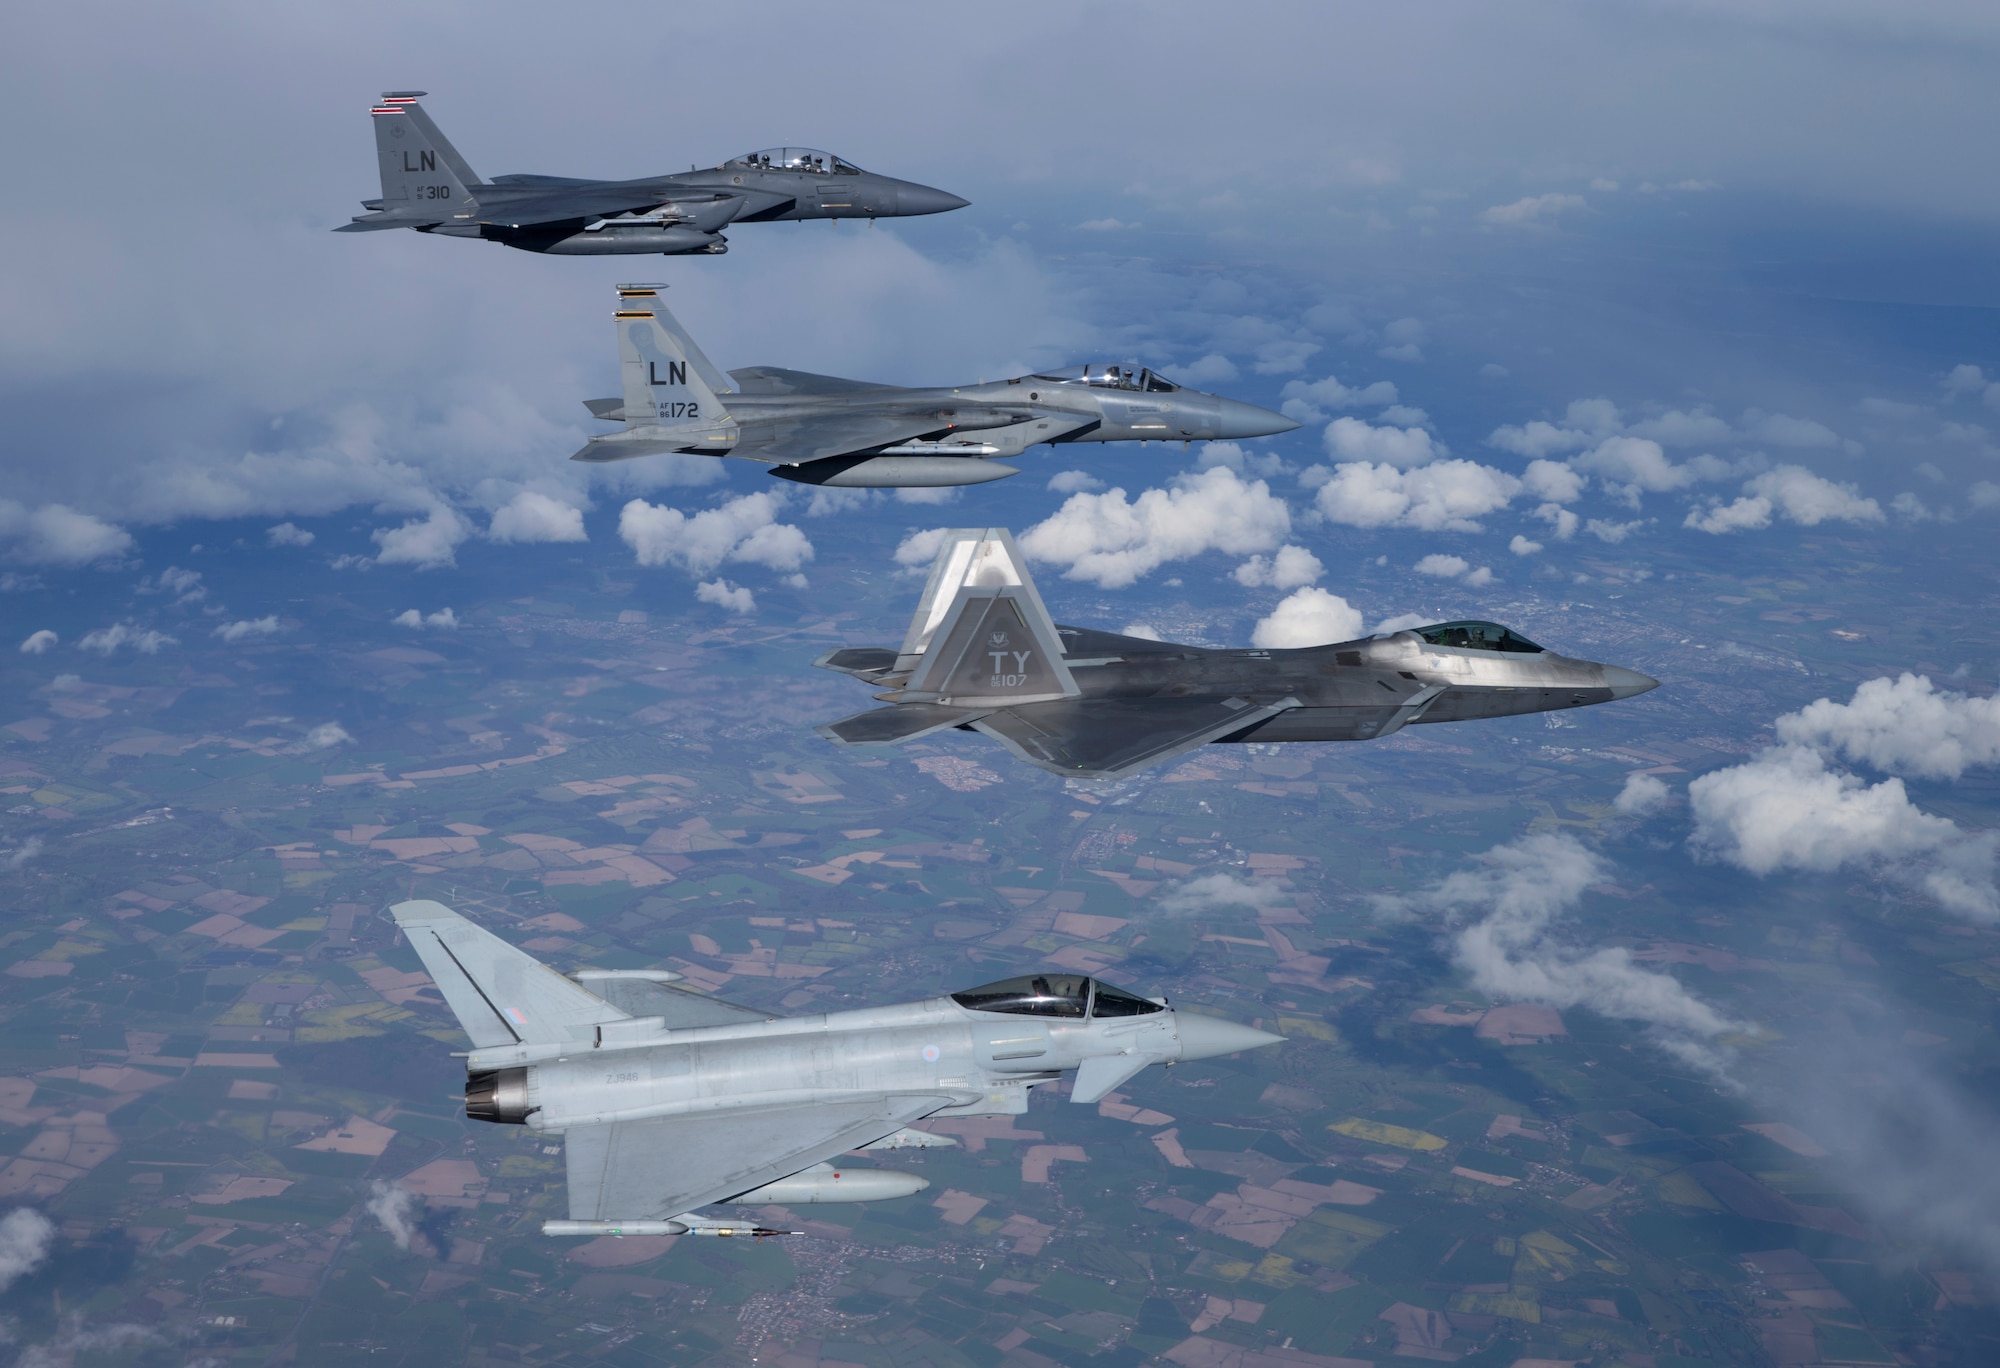 A four-ship formation consisting of a U.S. Air Force F-15E Strike Eagle from the 494th Fighter Squadron, an F-15 Eagle from the 493rd Fighter Squadron, an F-22A from the 95th Fighter Squadron, and a Royal Air Force Typhoon fly together during a training sortie April 26, 2016. 95th FS Airmen and aircraft are deployed from Tyndall Air Force Base, Fla., and will be conducting air training exercises with other U.S. and Royal Air Force aircraft over the next several weeks. (Courtesy photo by Jim Haseltine/Released)